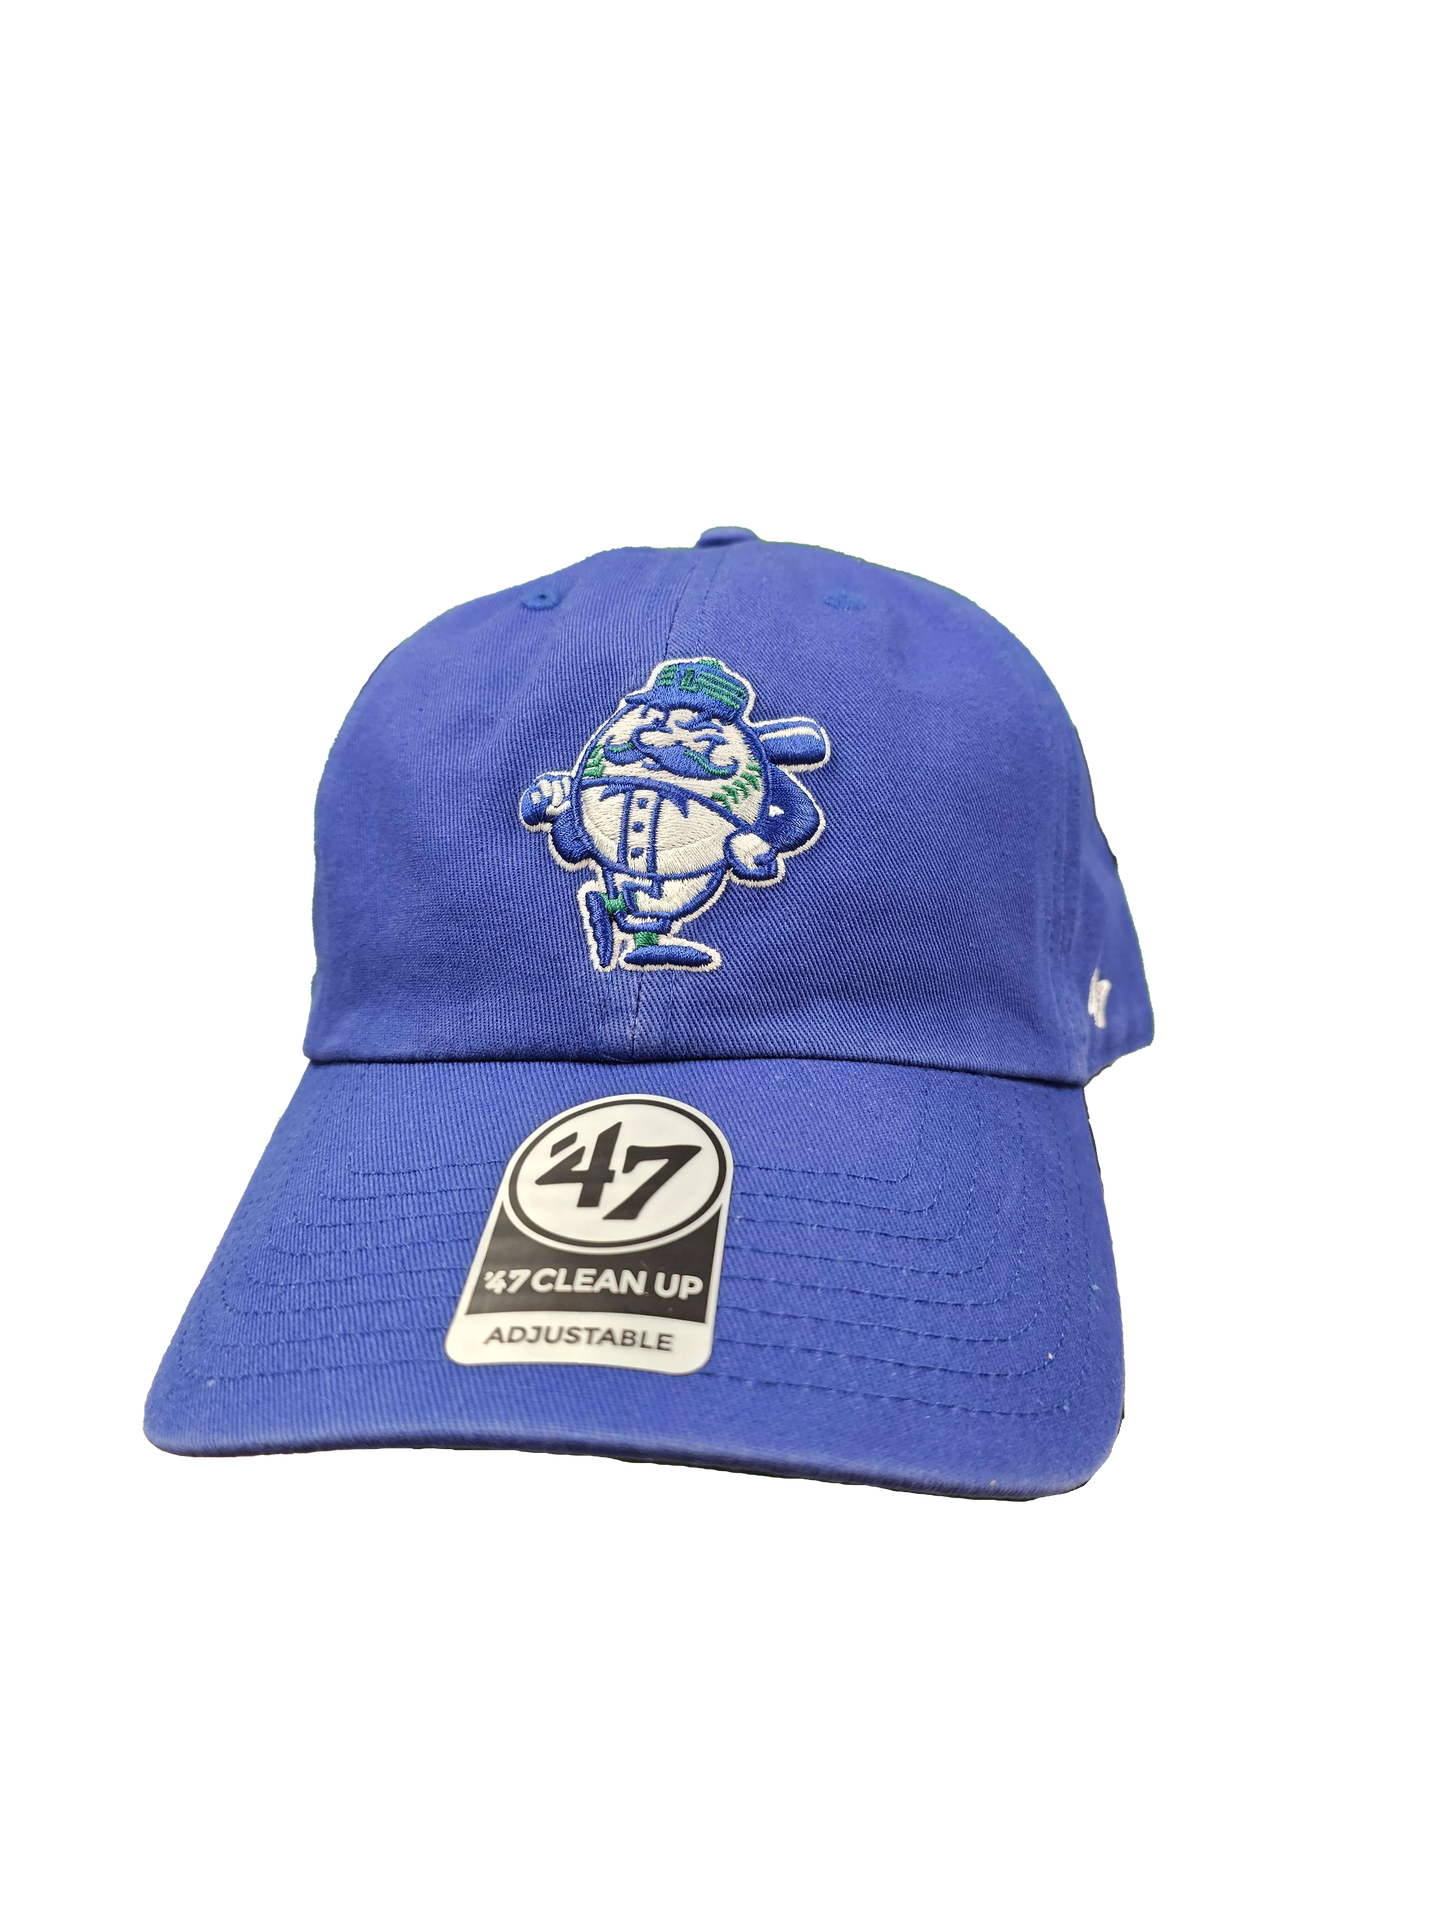 '47 Brand Royal Mighty Lex Clean Up Cap